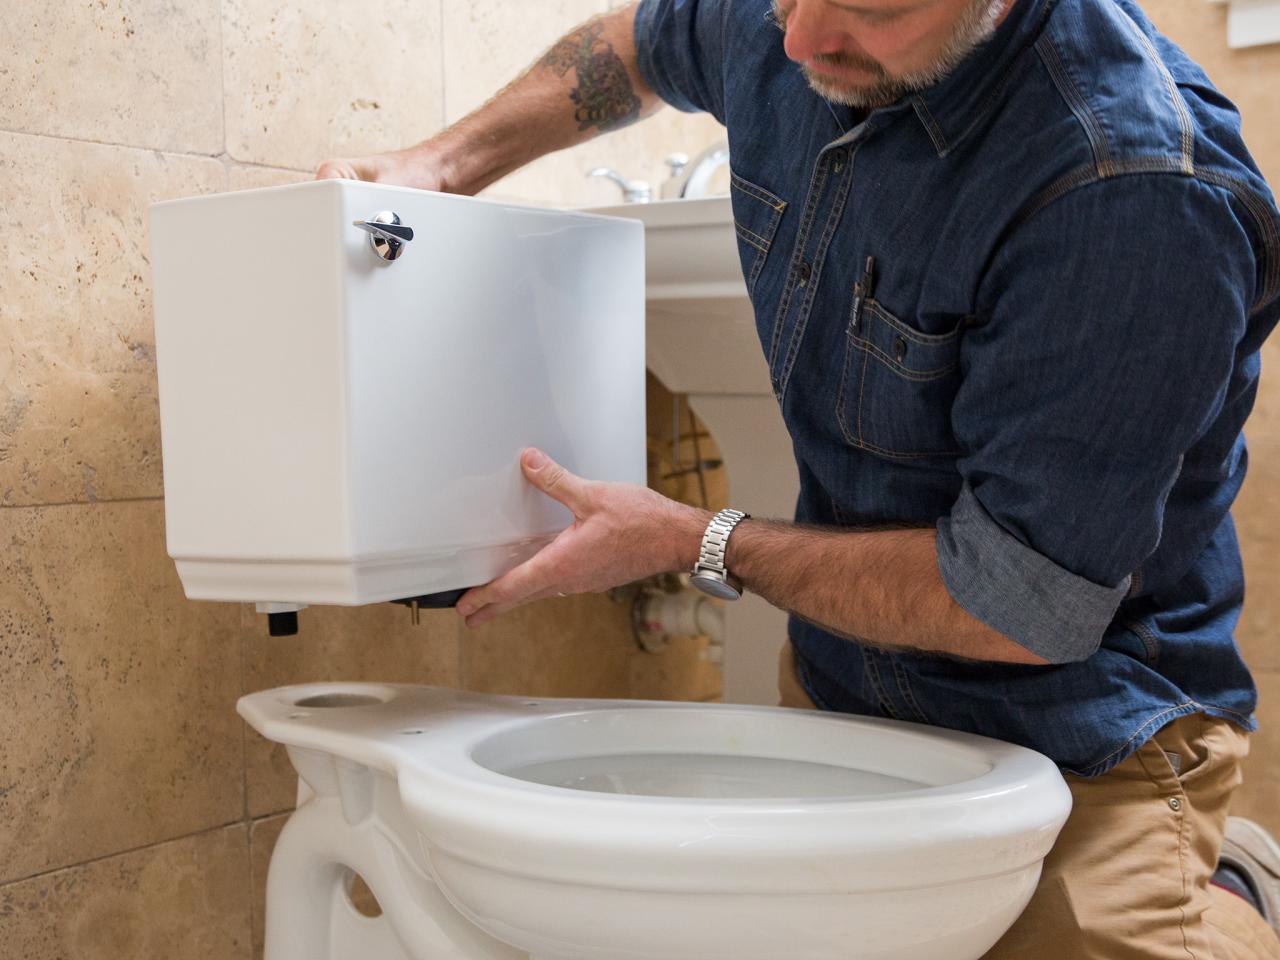 How To Install a 10 Inch Toilet?